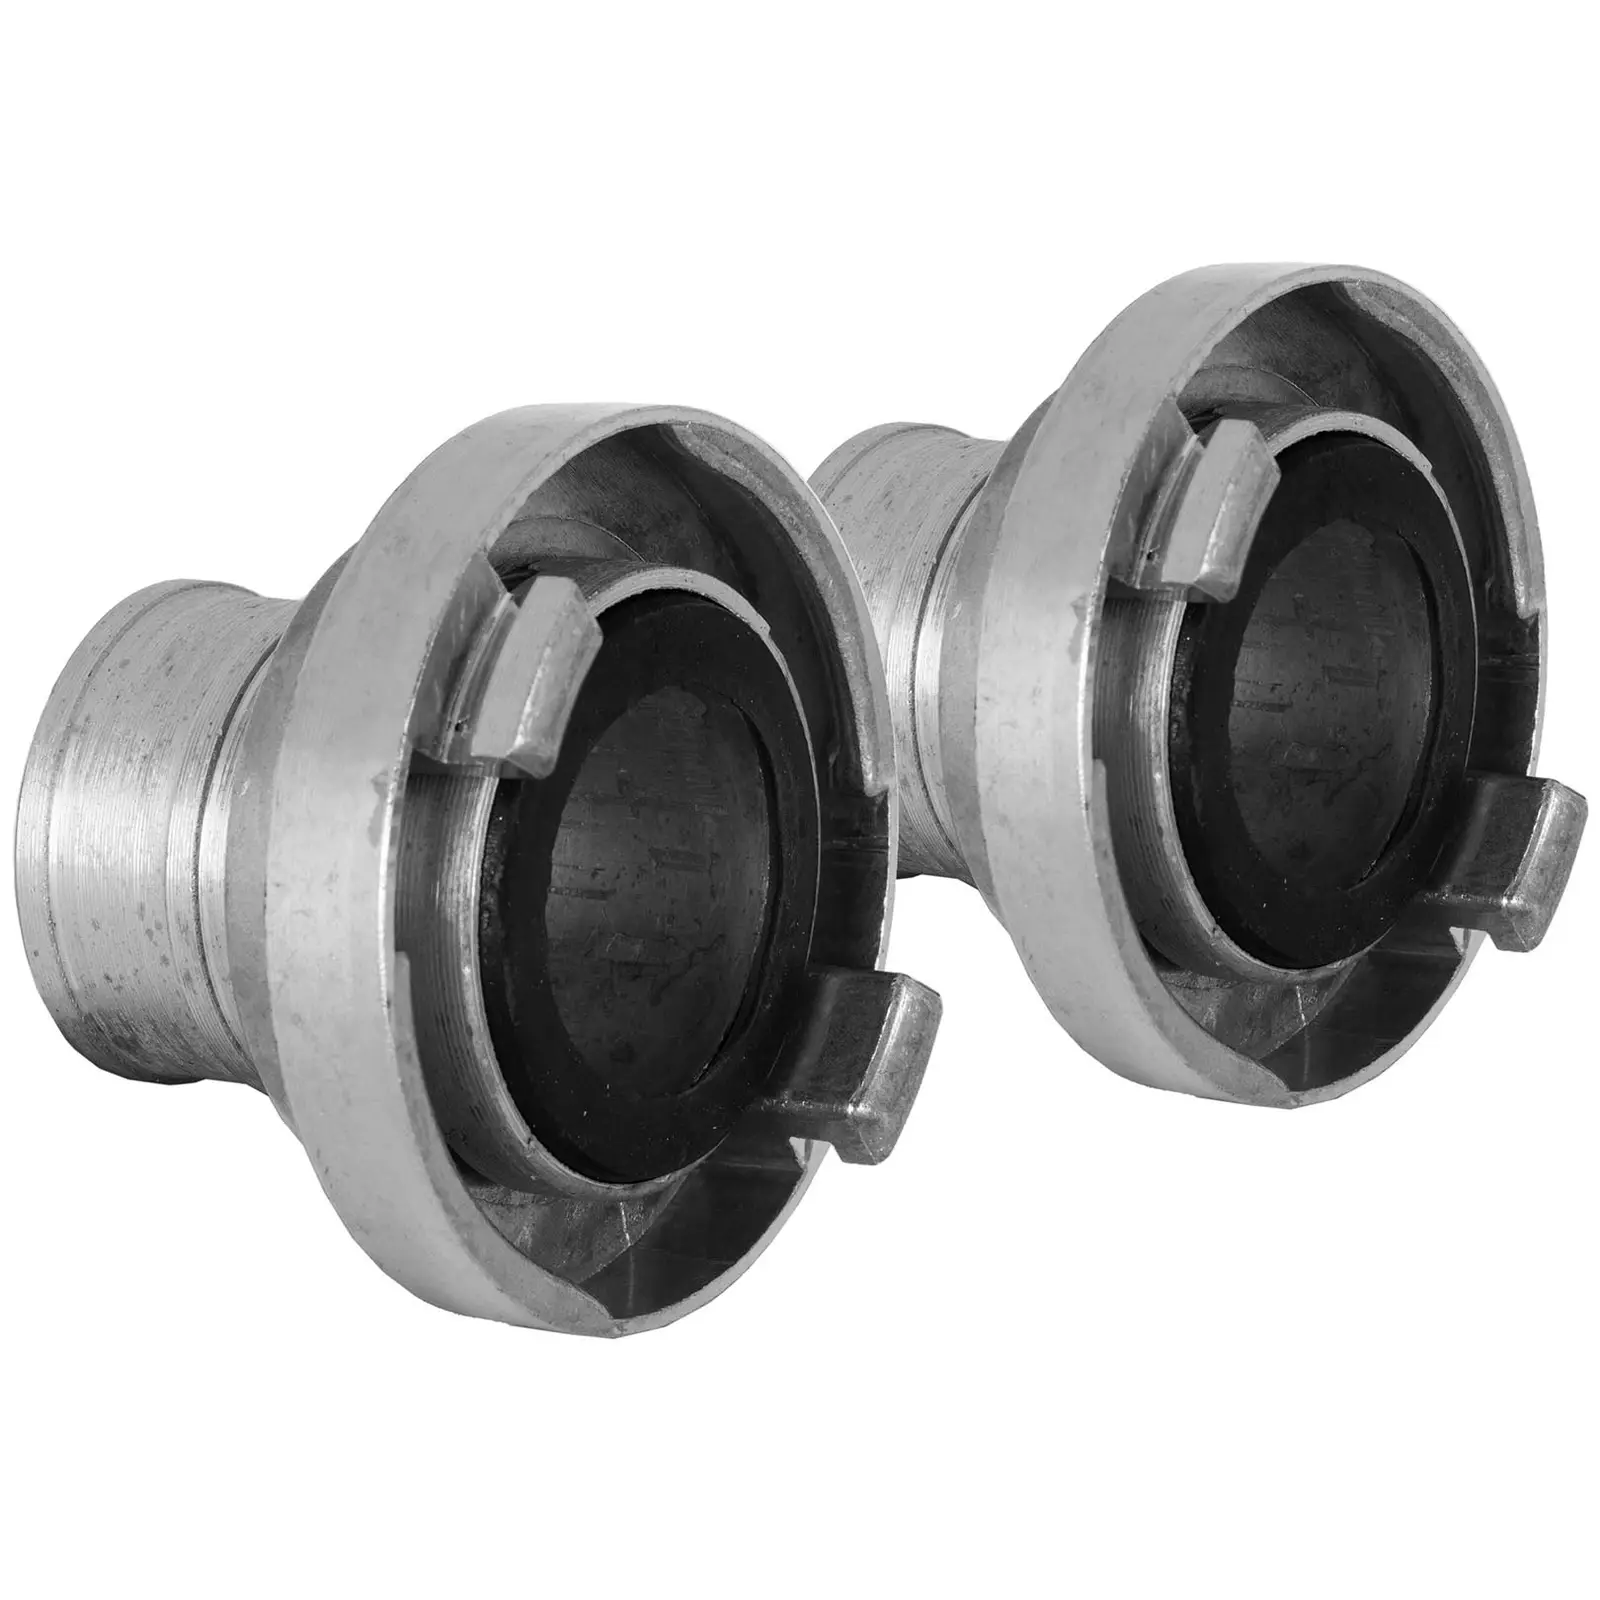 Sugekobling - dyse 2" (52 mm) - Storz